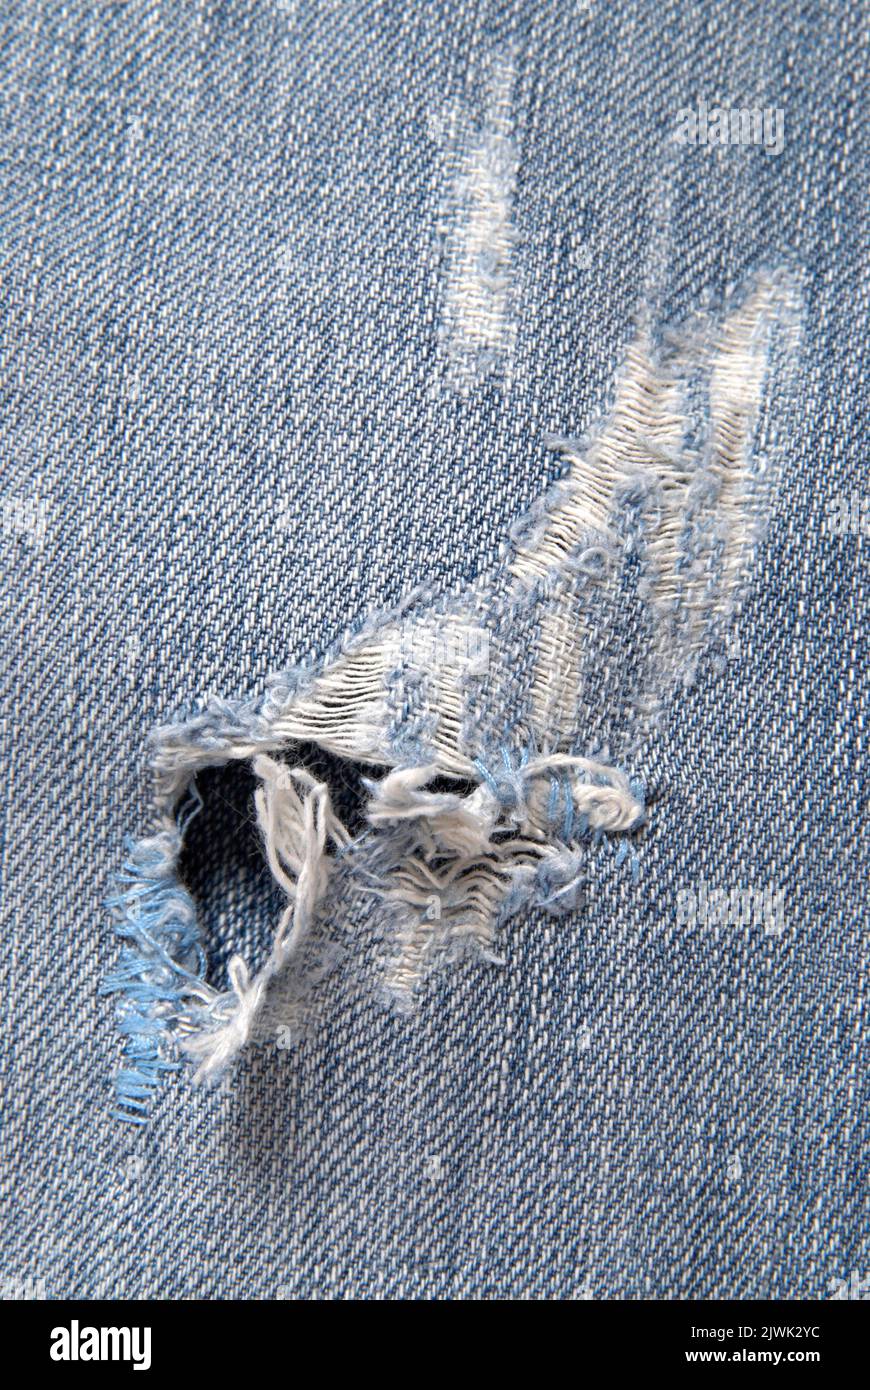 Close up detail of torn denim jeans background Stock Photo